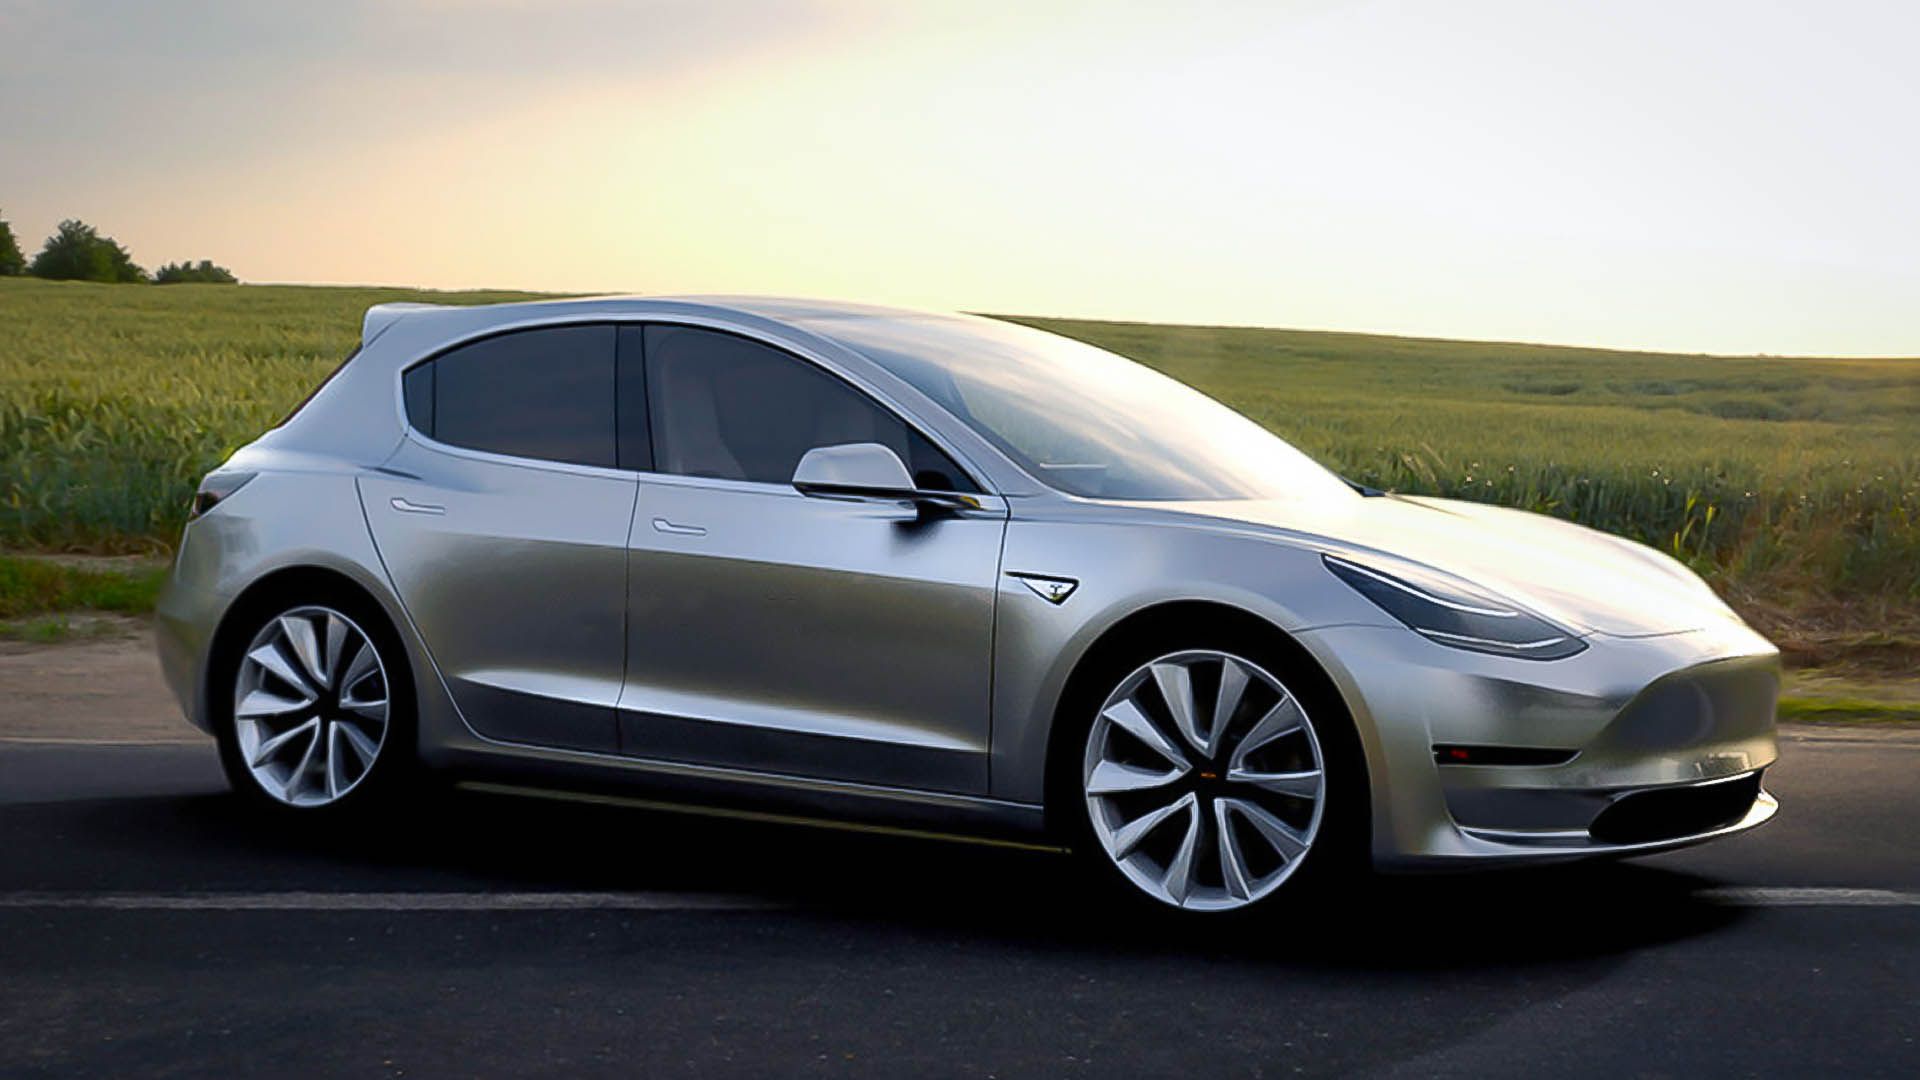 An Image Of A Silver Tesla Model 2